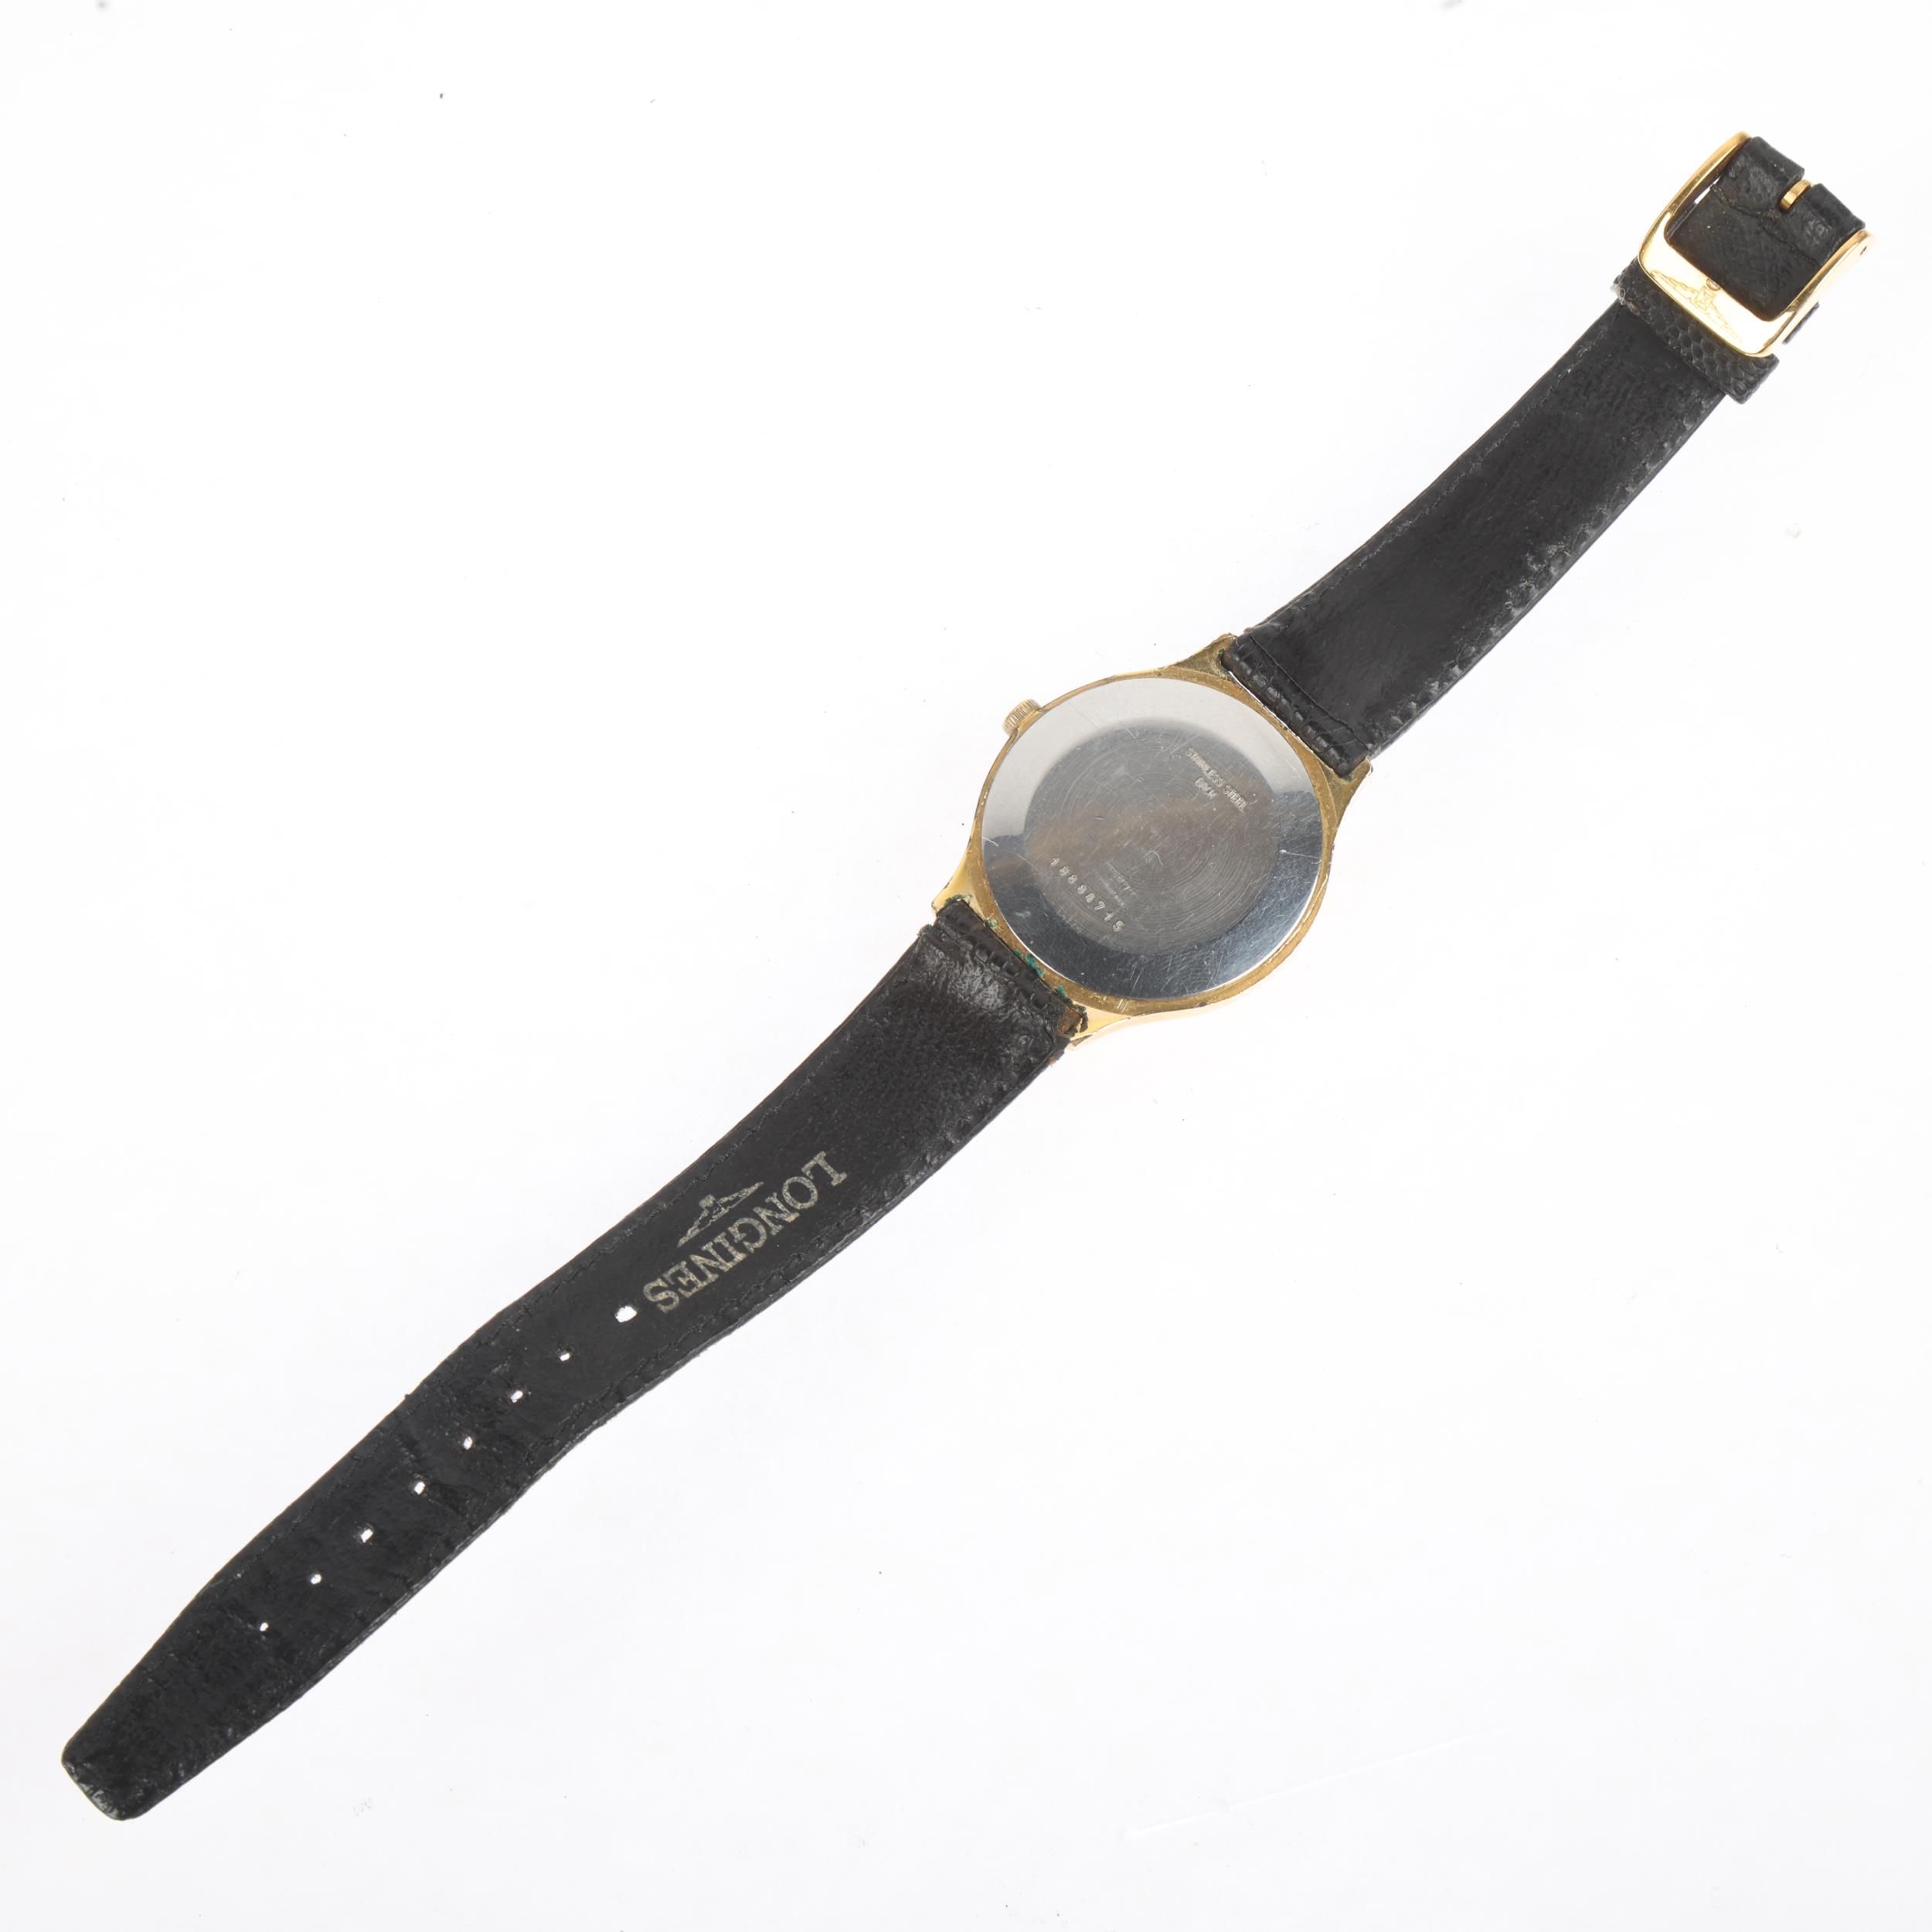 LONGINES - a gold plated stainless steel mechanical wristwatch, ref. 4427 847, circa 1970s, - Image 3 of 5